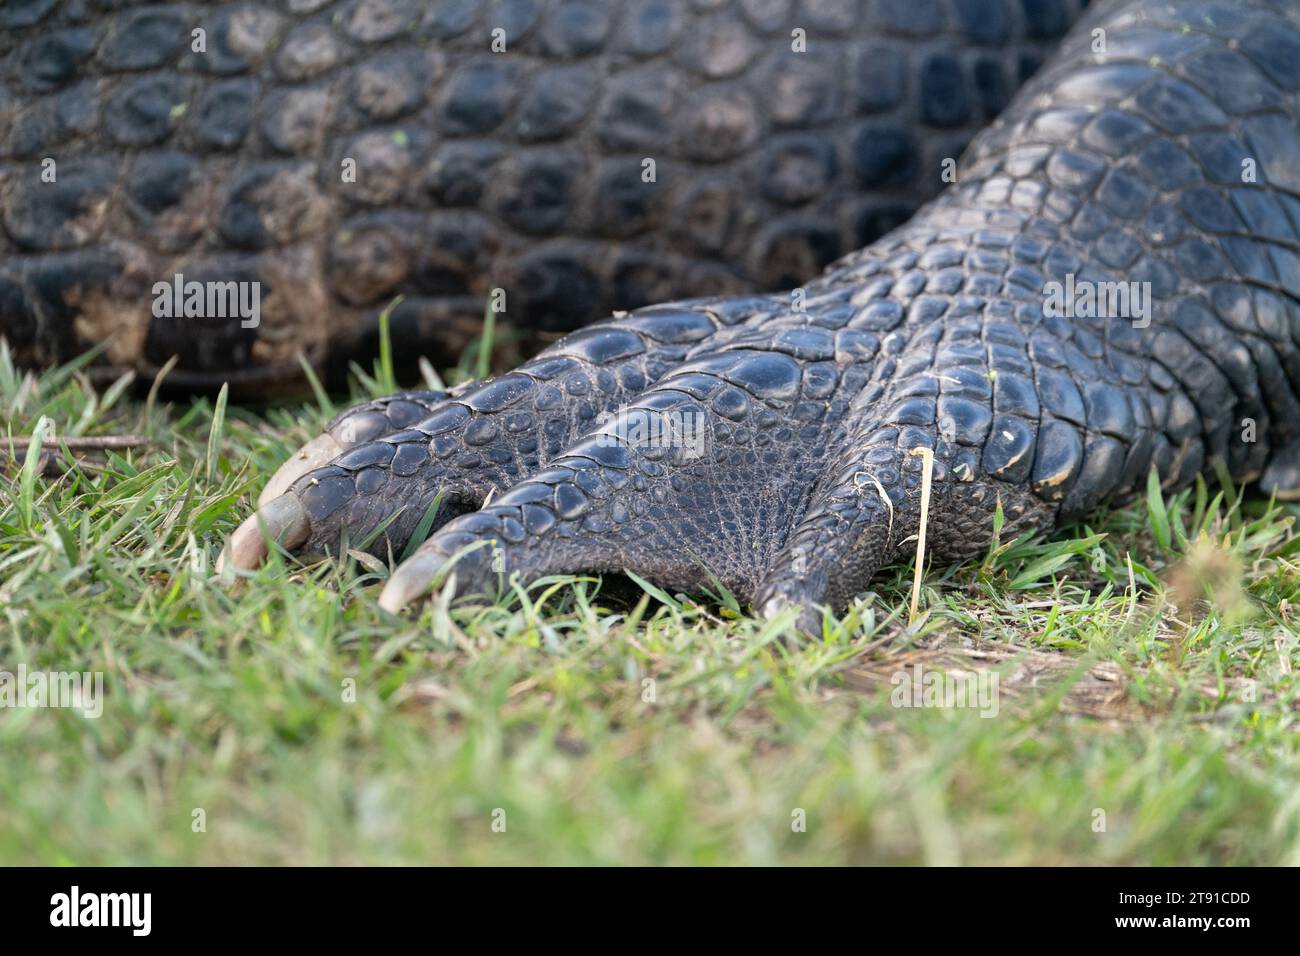 The foot of a massive American alligator in Polk County, Florida. Stock Photo